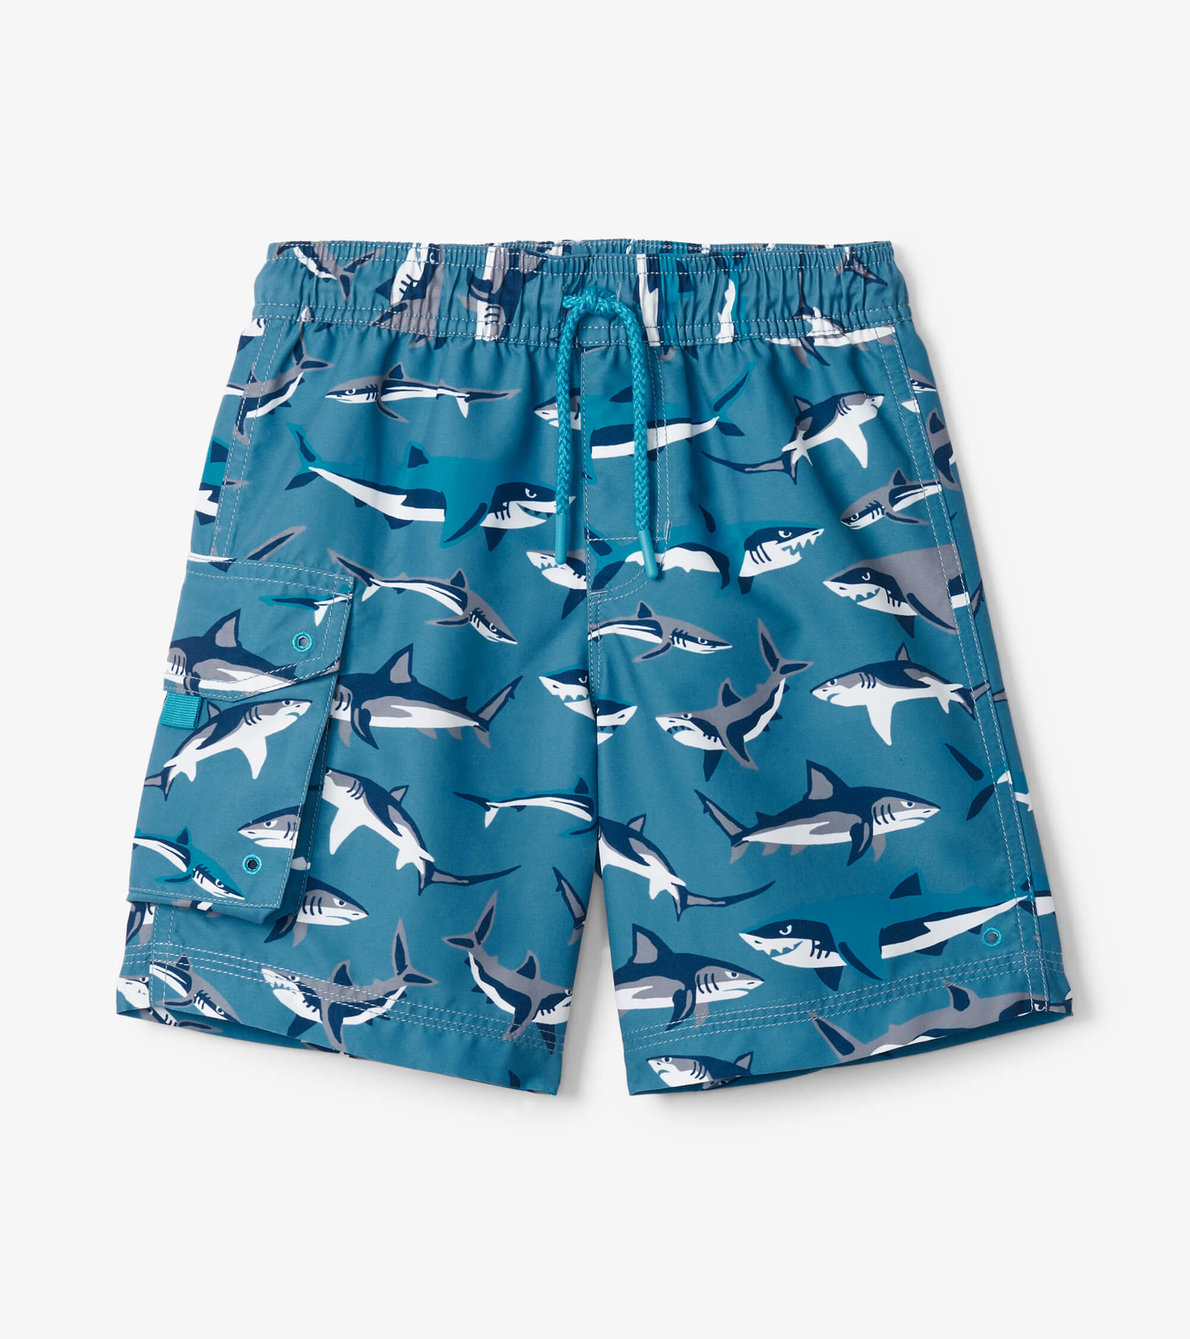 View larger image of Sneak Around Sharks Board Shorts